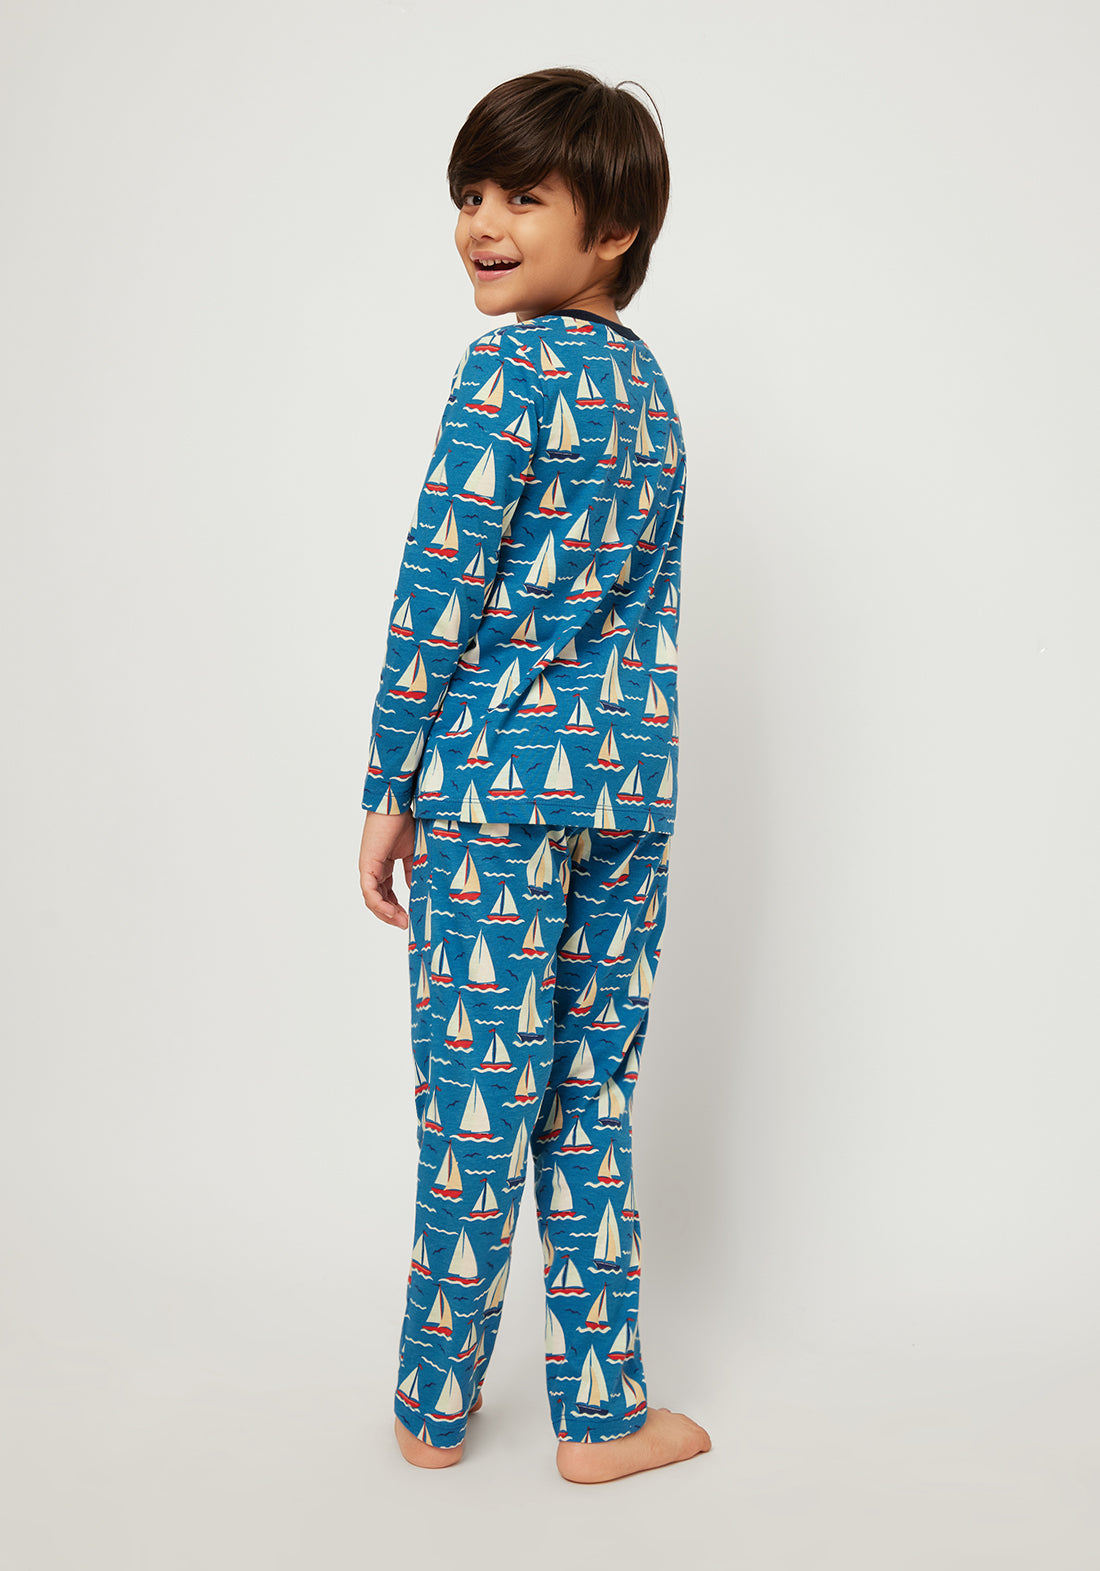 RED, WHITE AND BLUE BOAT PRINT LONG SLEEVE PAJAMA SET